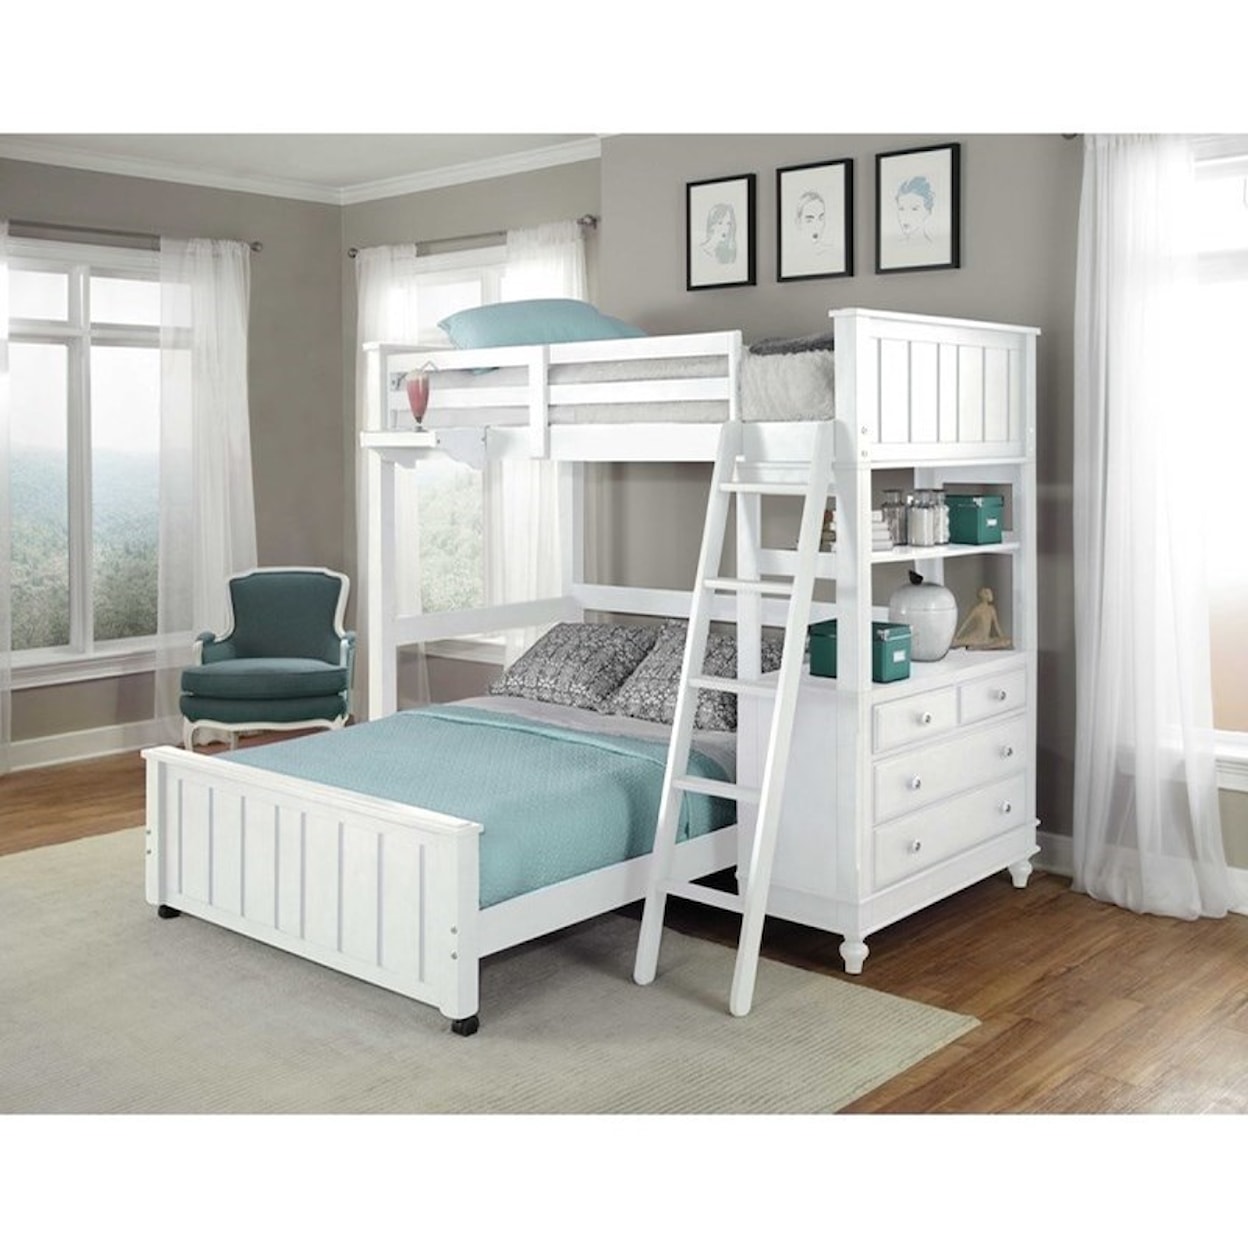 NE Kids Lake House Lofted Twin Bed with Full Lower Bed